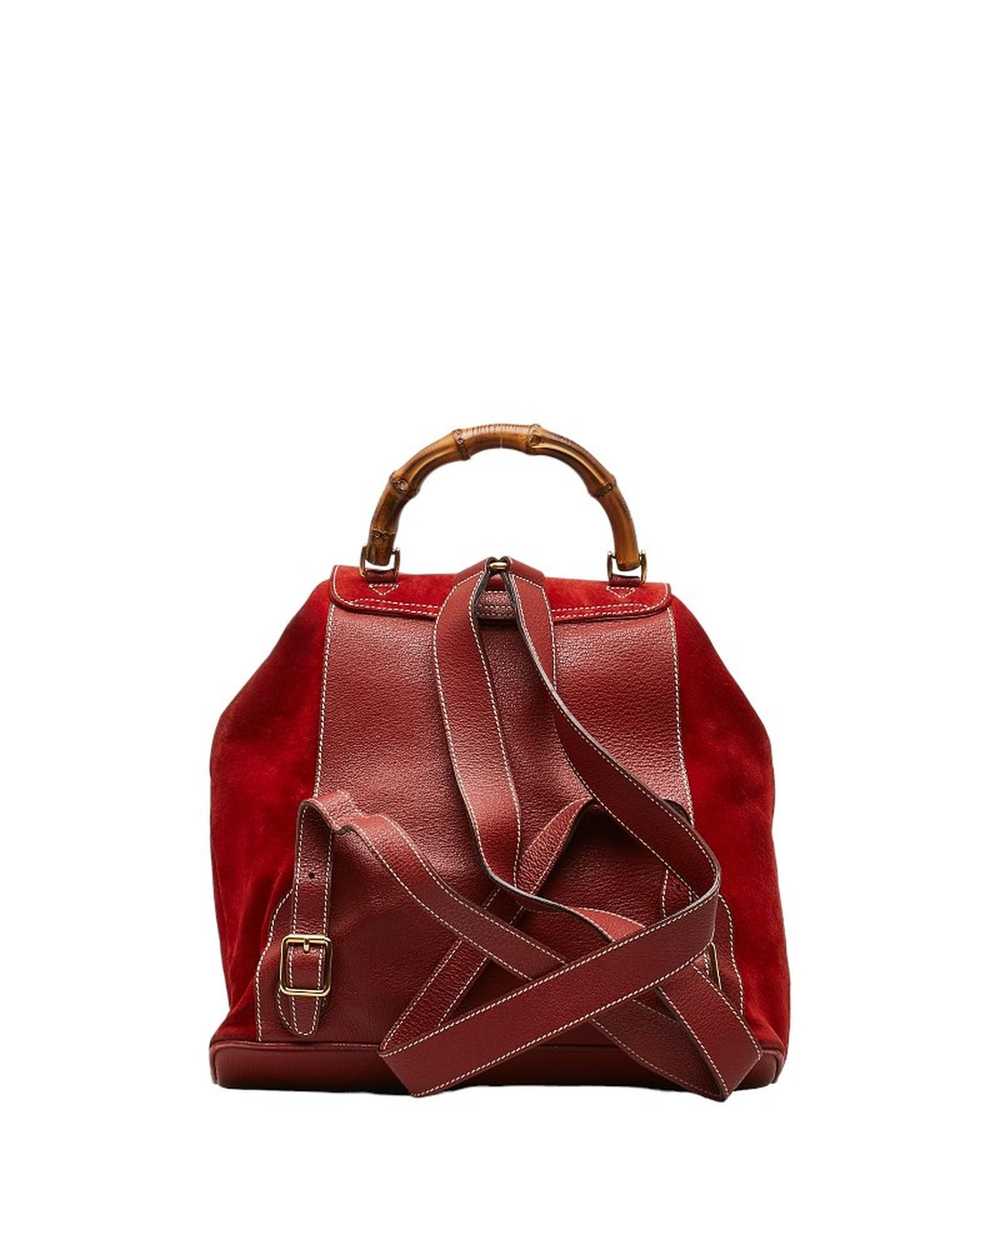 Gucci Red Suede Bamboo Backpack Bag - image 3